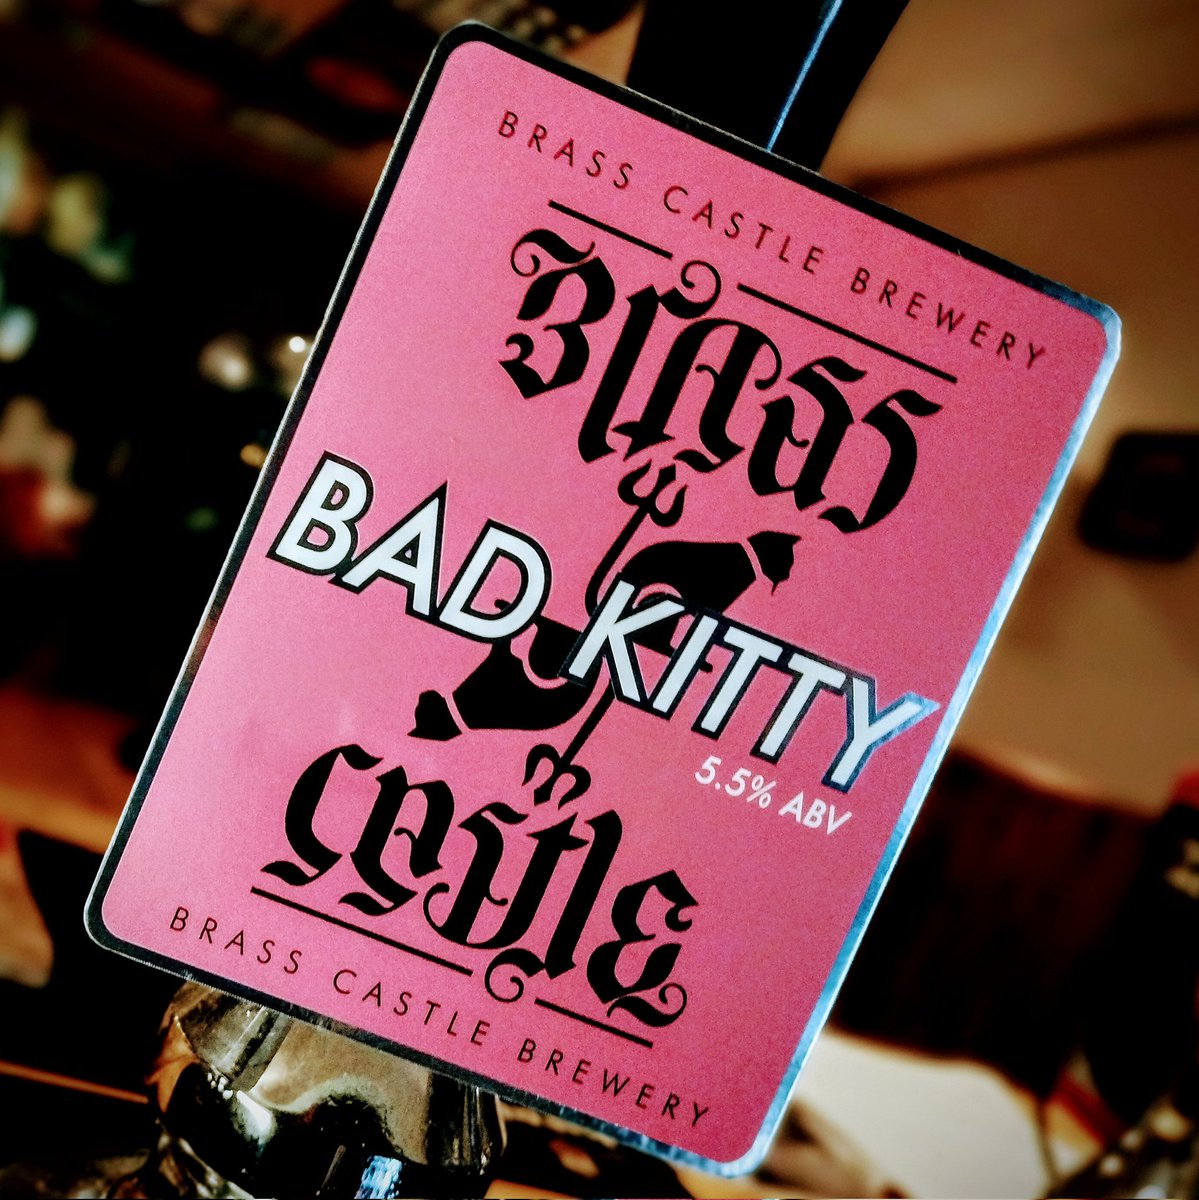 You lot can't get enough cask stouts and porters at the moment!

We've not had Brass Castle's Bad Kitty since before Covid, but in those heady days it was always a Hop favourite... A big 5.5% chocolate vanilla porter - creamy, sweet and decadent.

Open at 4pm 👍

#colwynbay